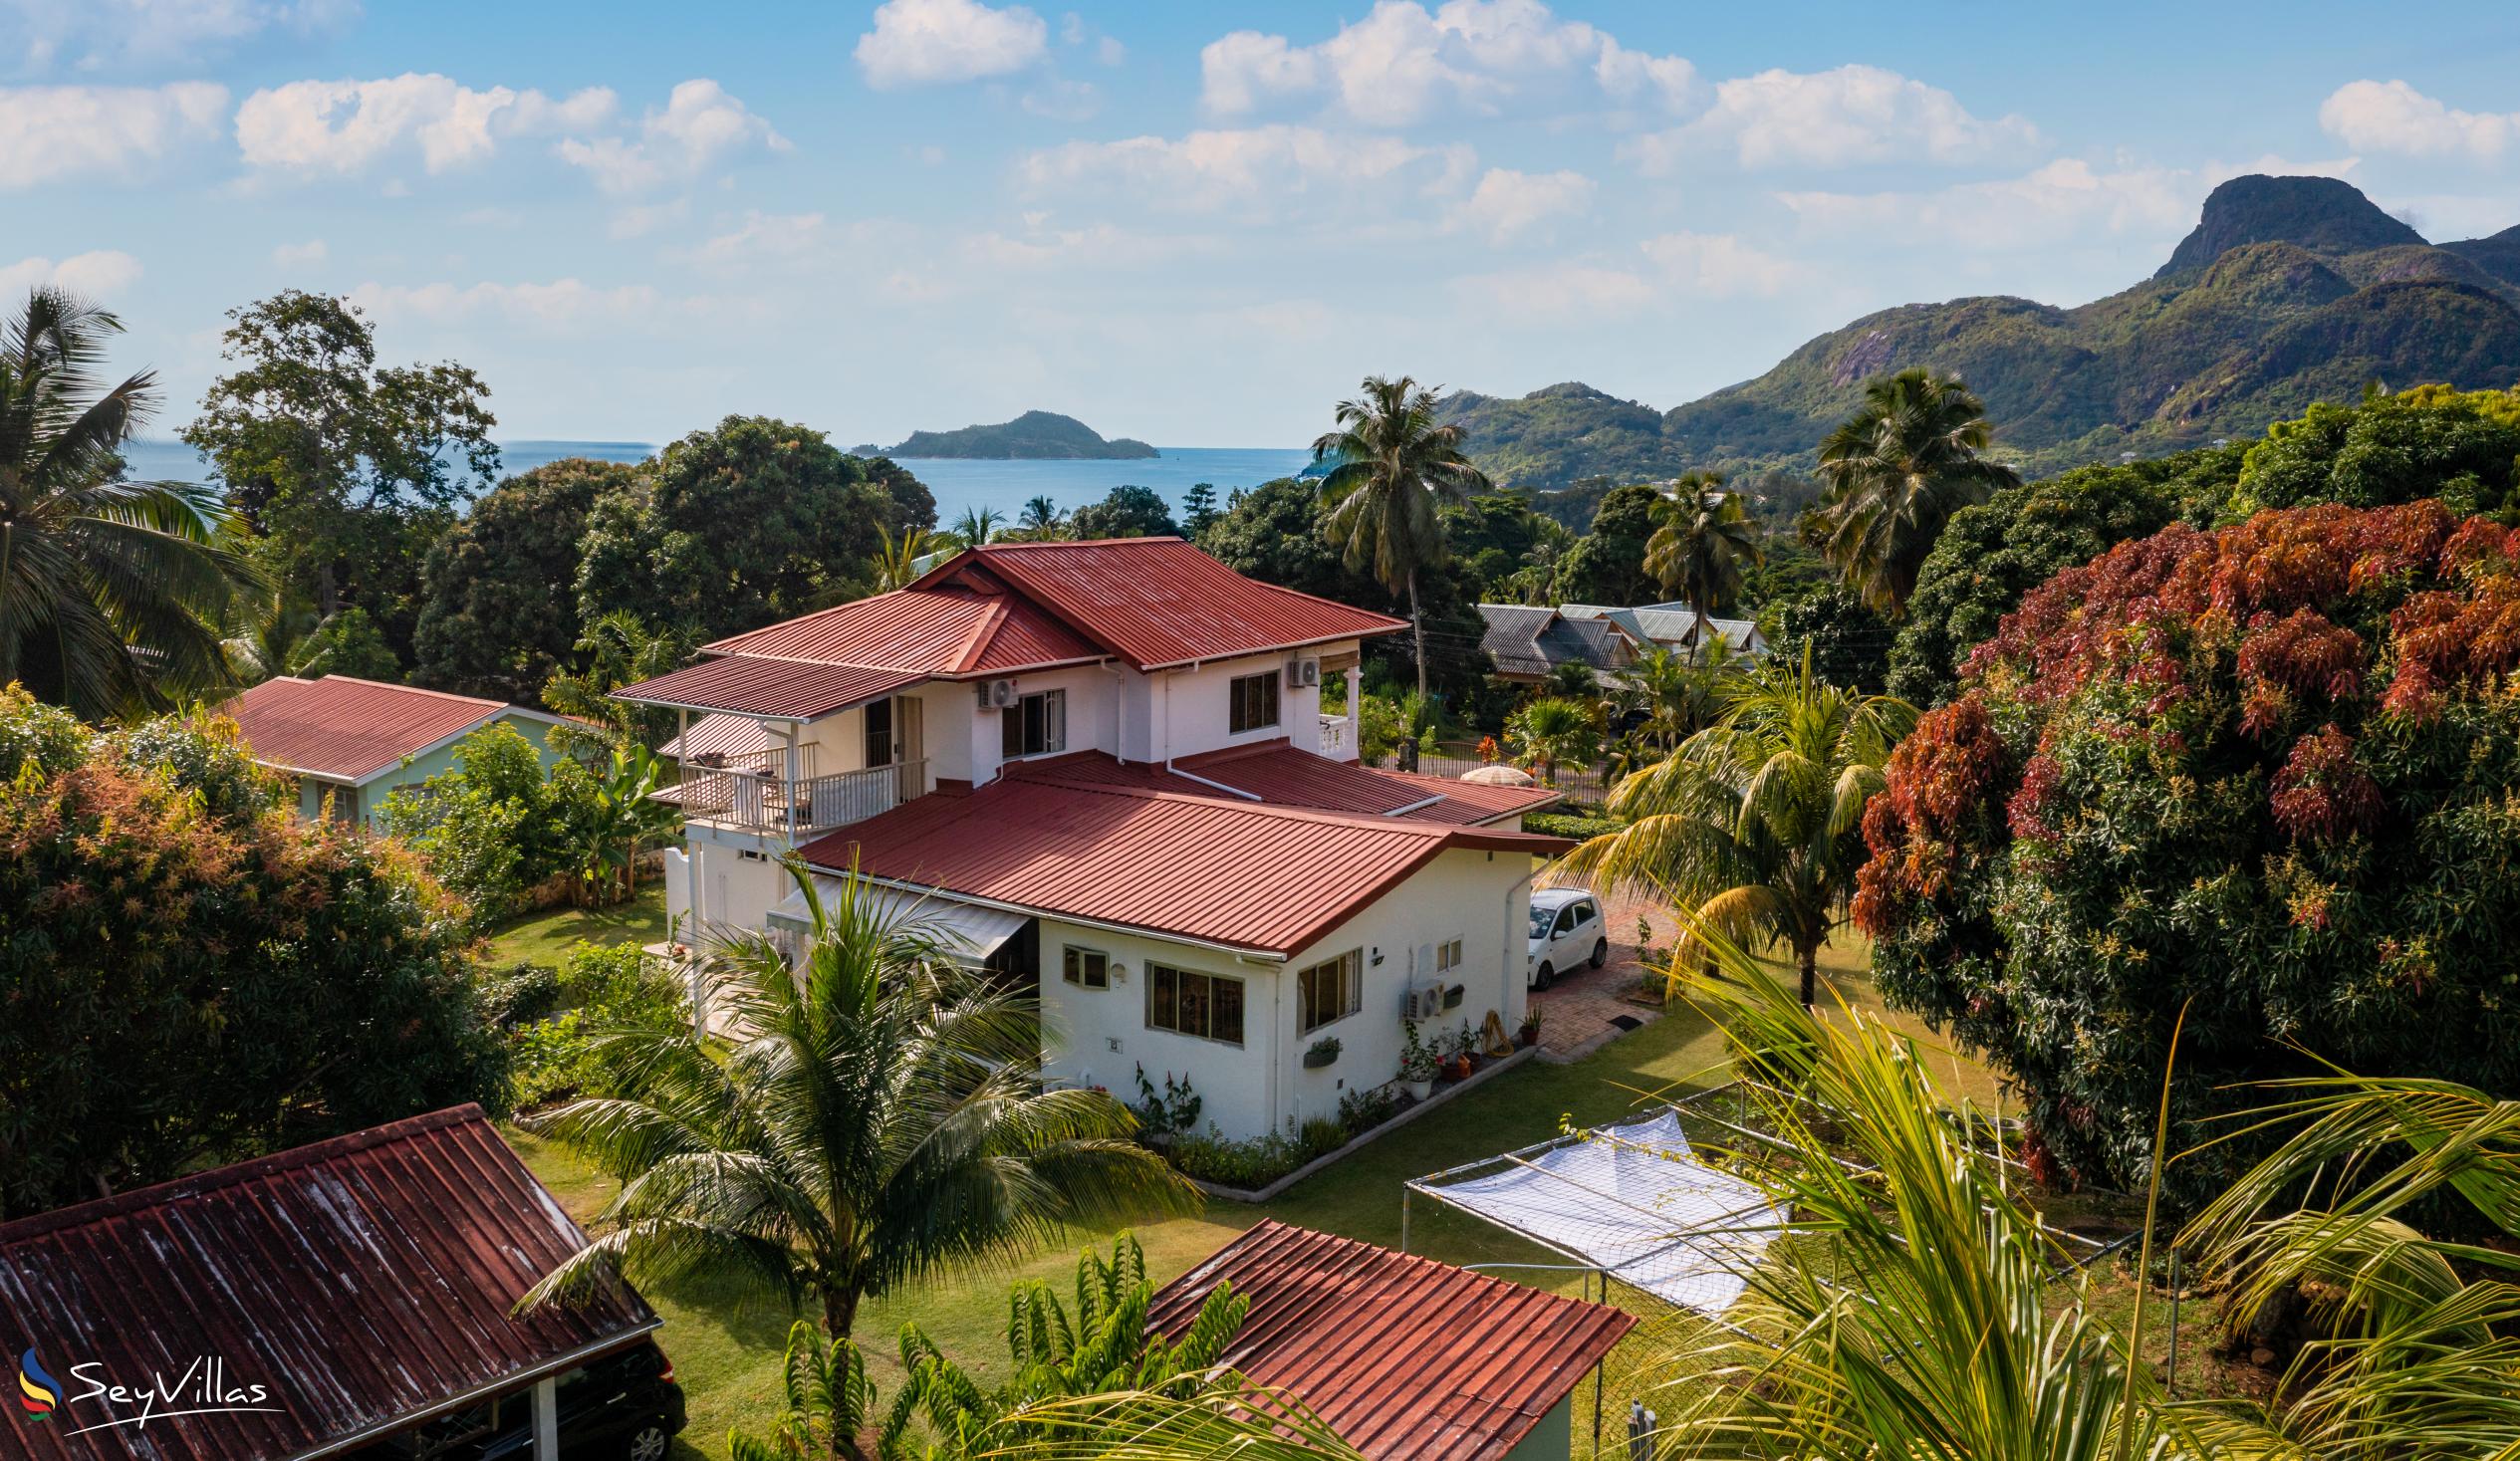 Foto 2: The Orchard Holiday Home - Esterno - Mahé (Seychelles)